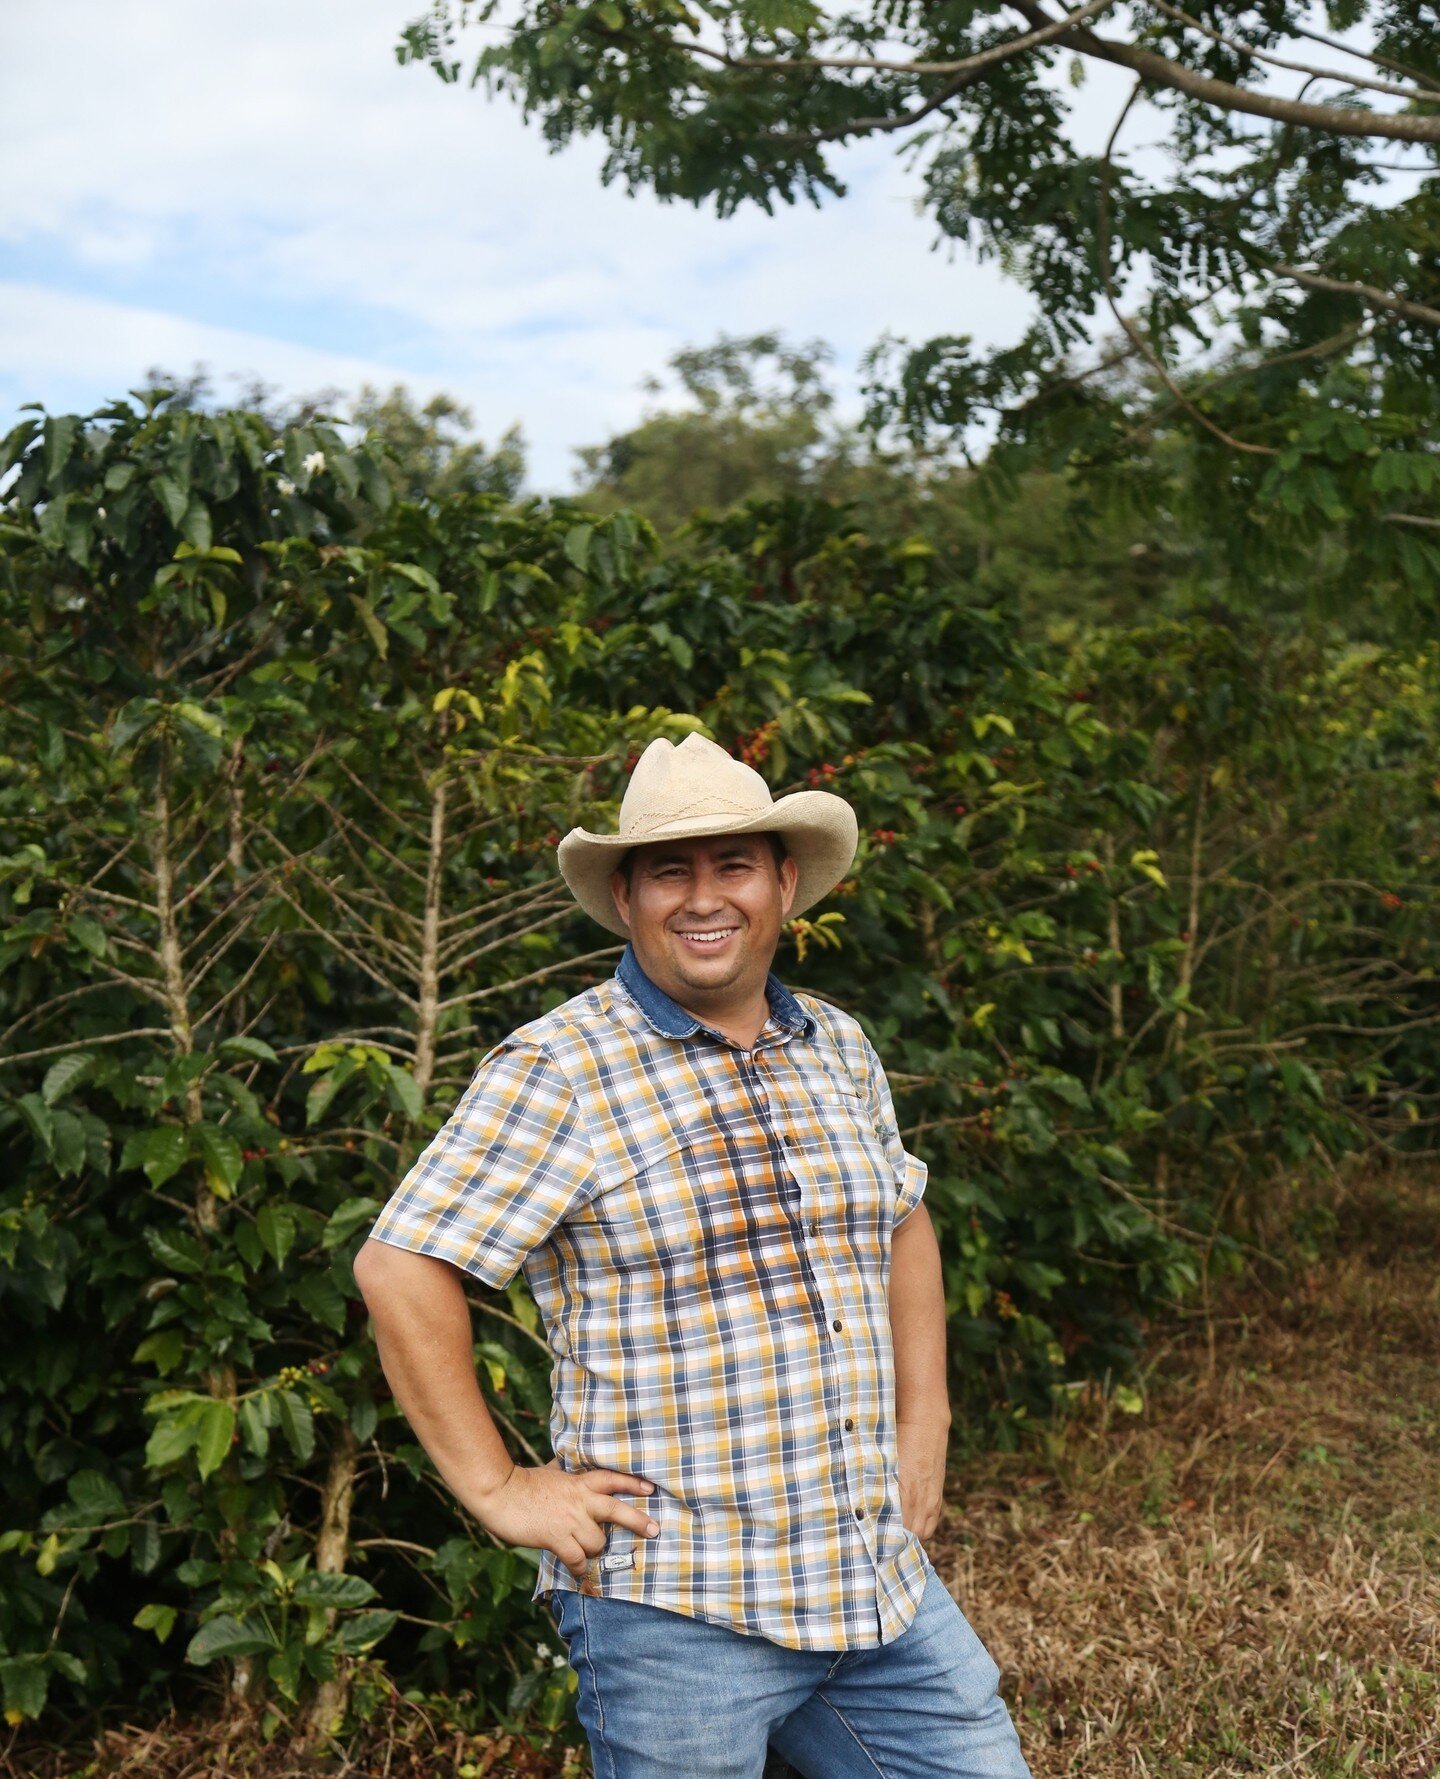 We've got a new coffee from our friends at @cafeticuna, @josejadirlosada and @owelaohgwaih. We've bought from their farm El Mirador before and have worked with their export company, @ositocoffee, for five years in Colombia. They're a core⁠
relationsh